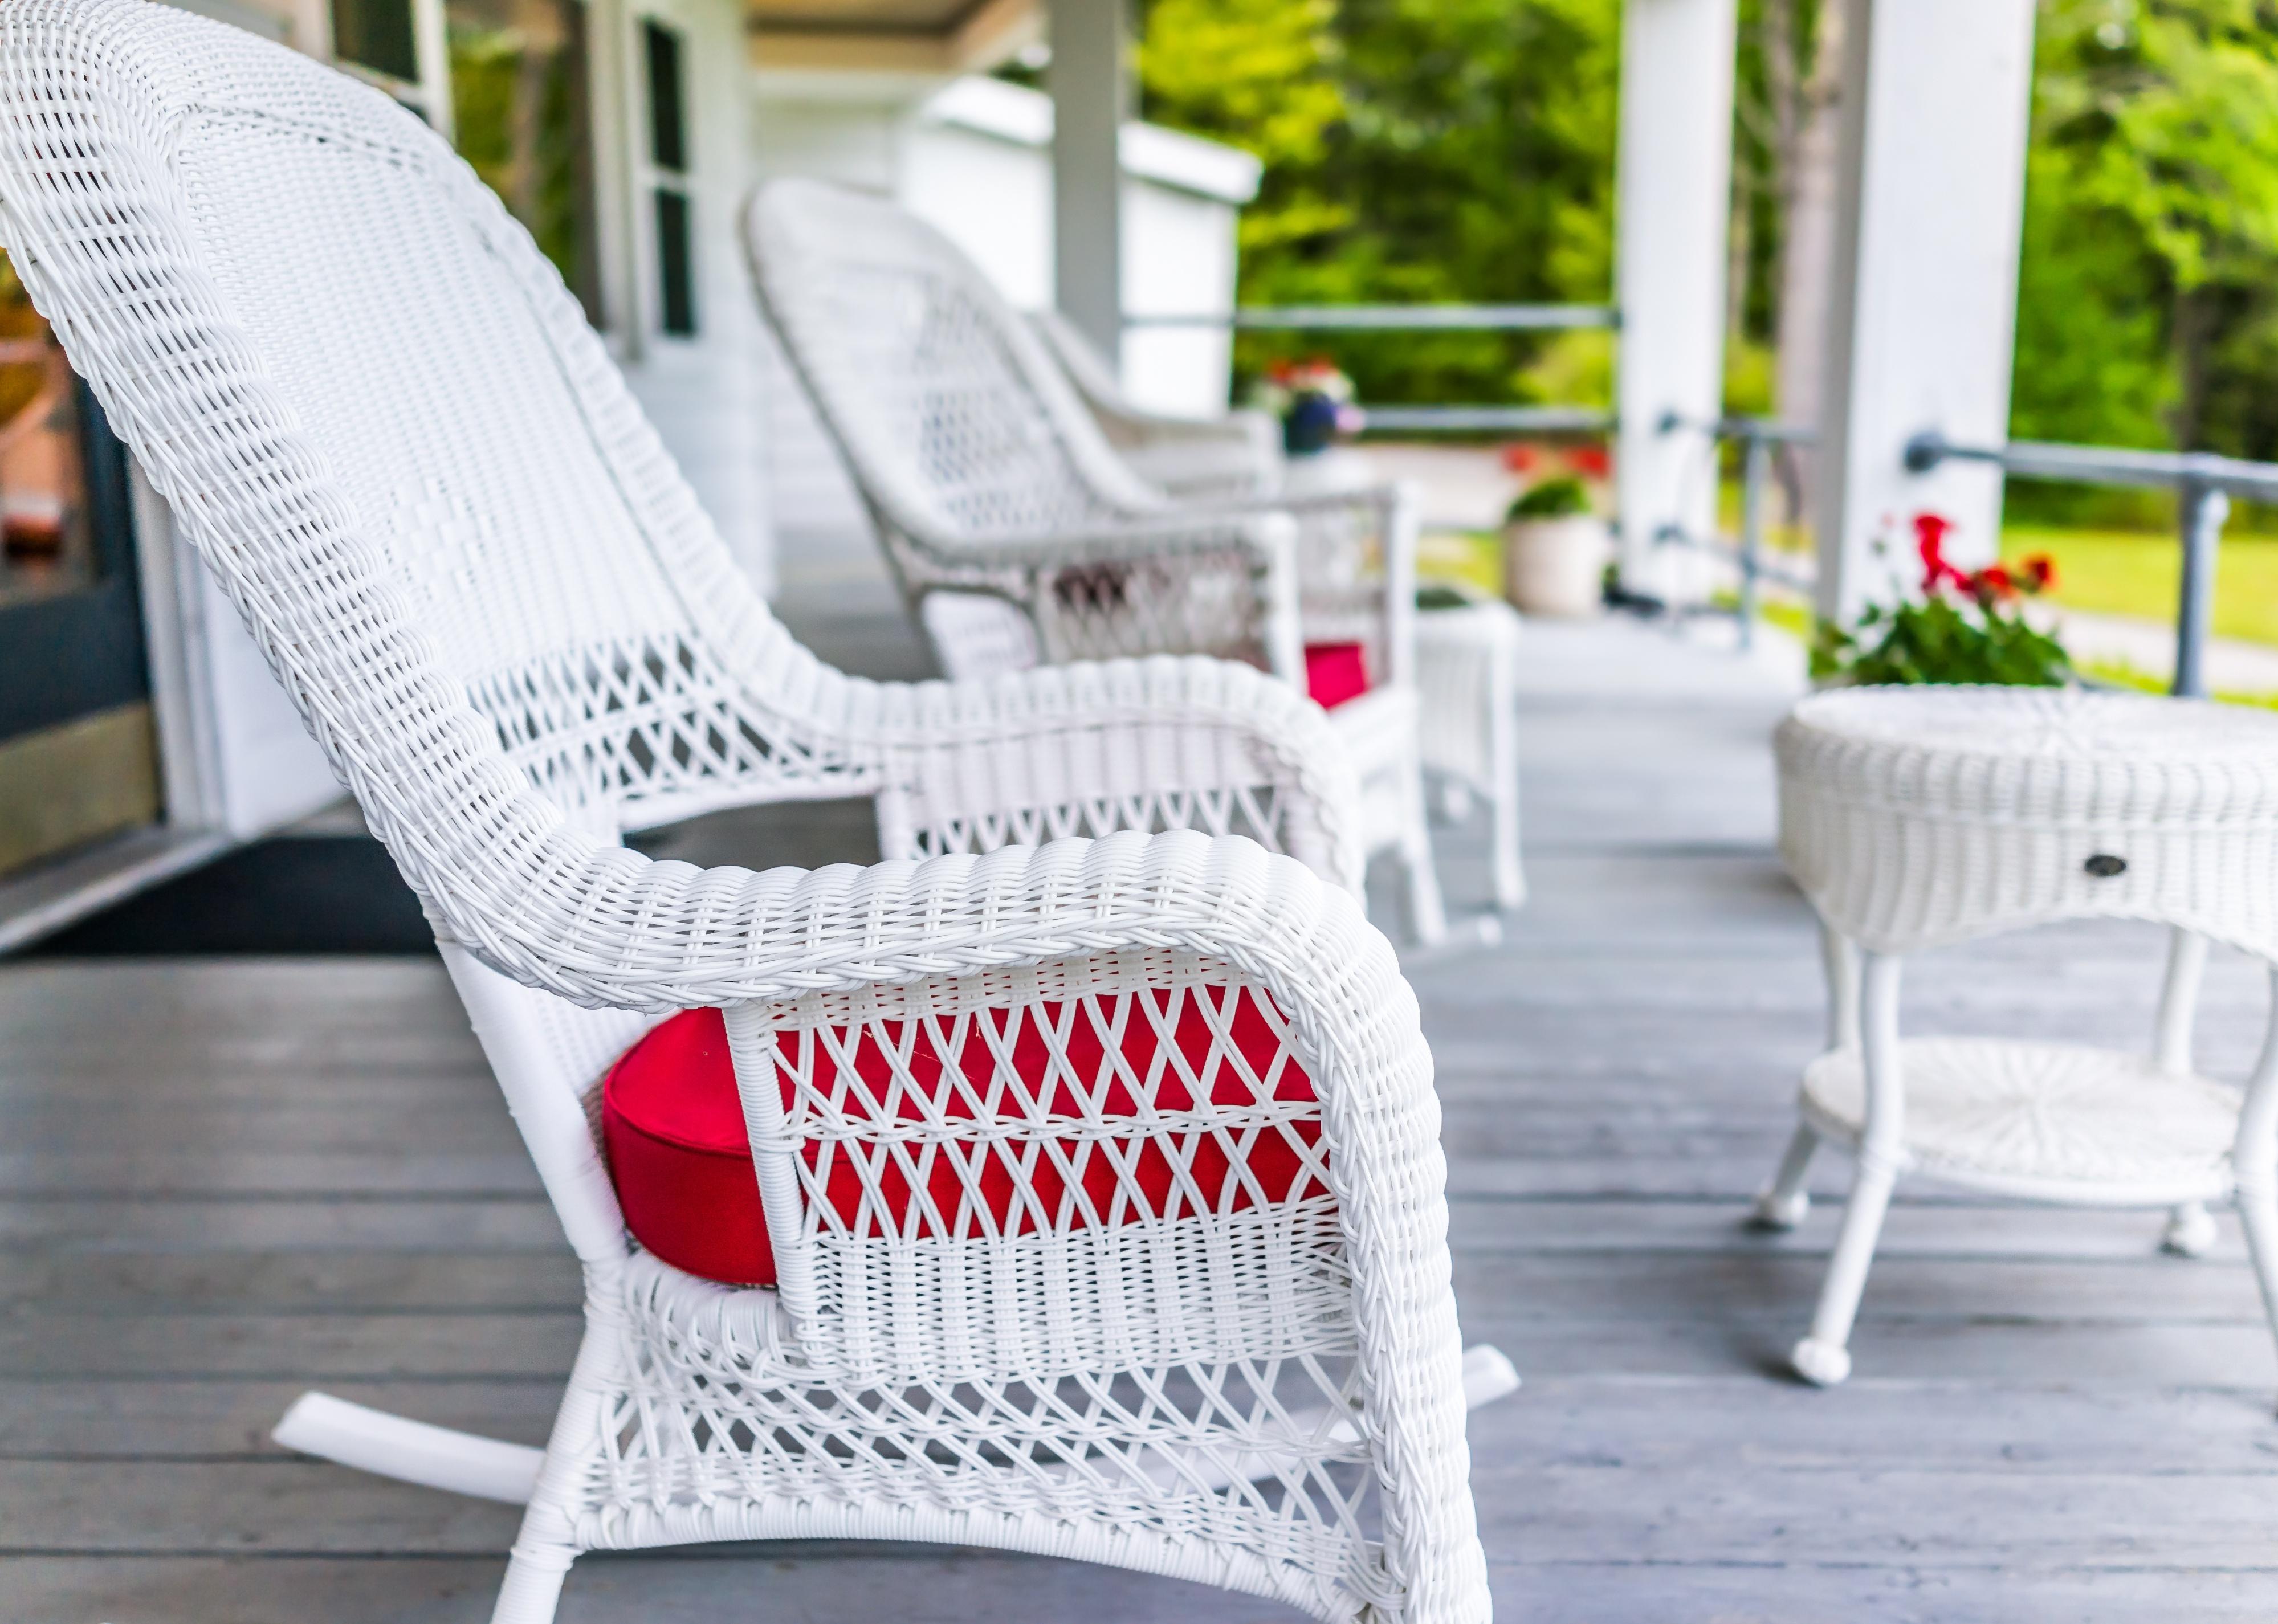 Front porch of house with white rocking chairs on wooden deck.